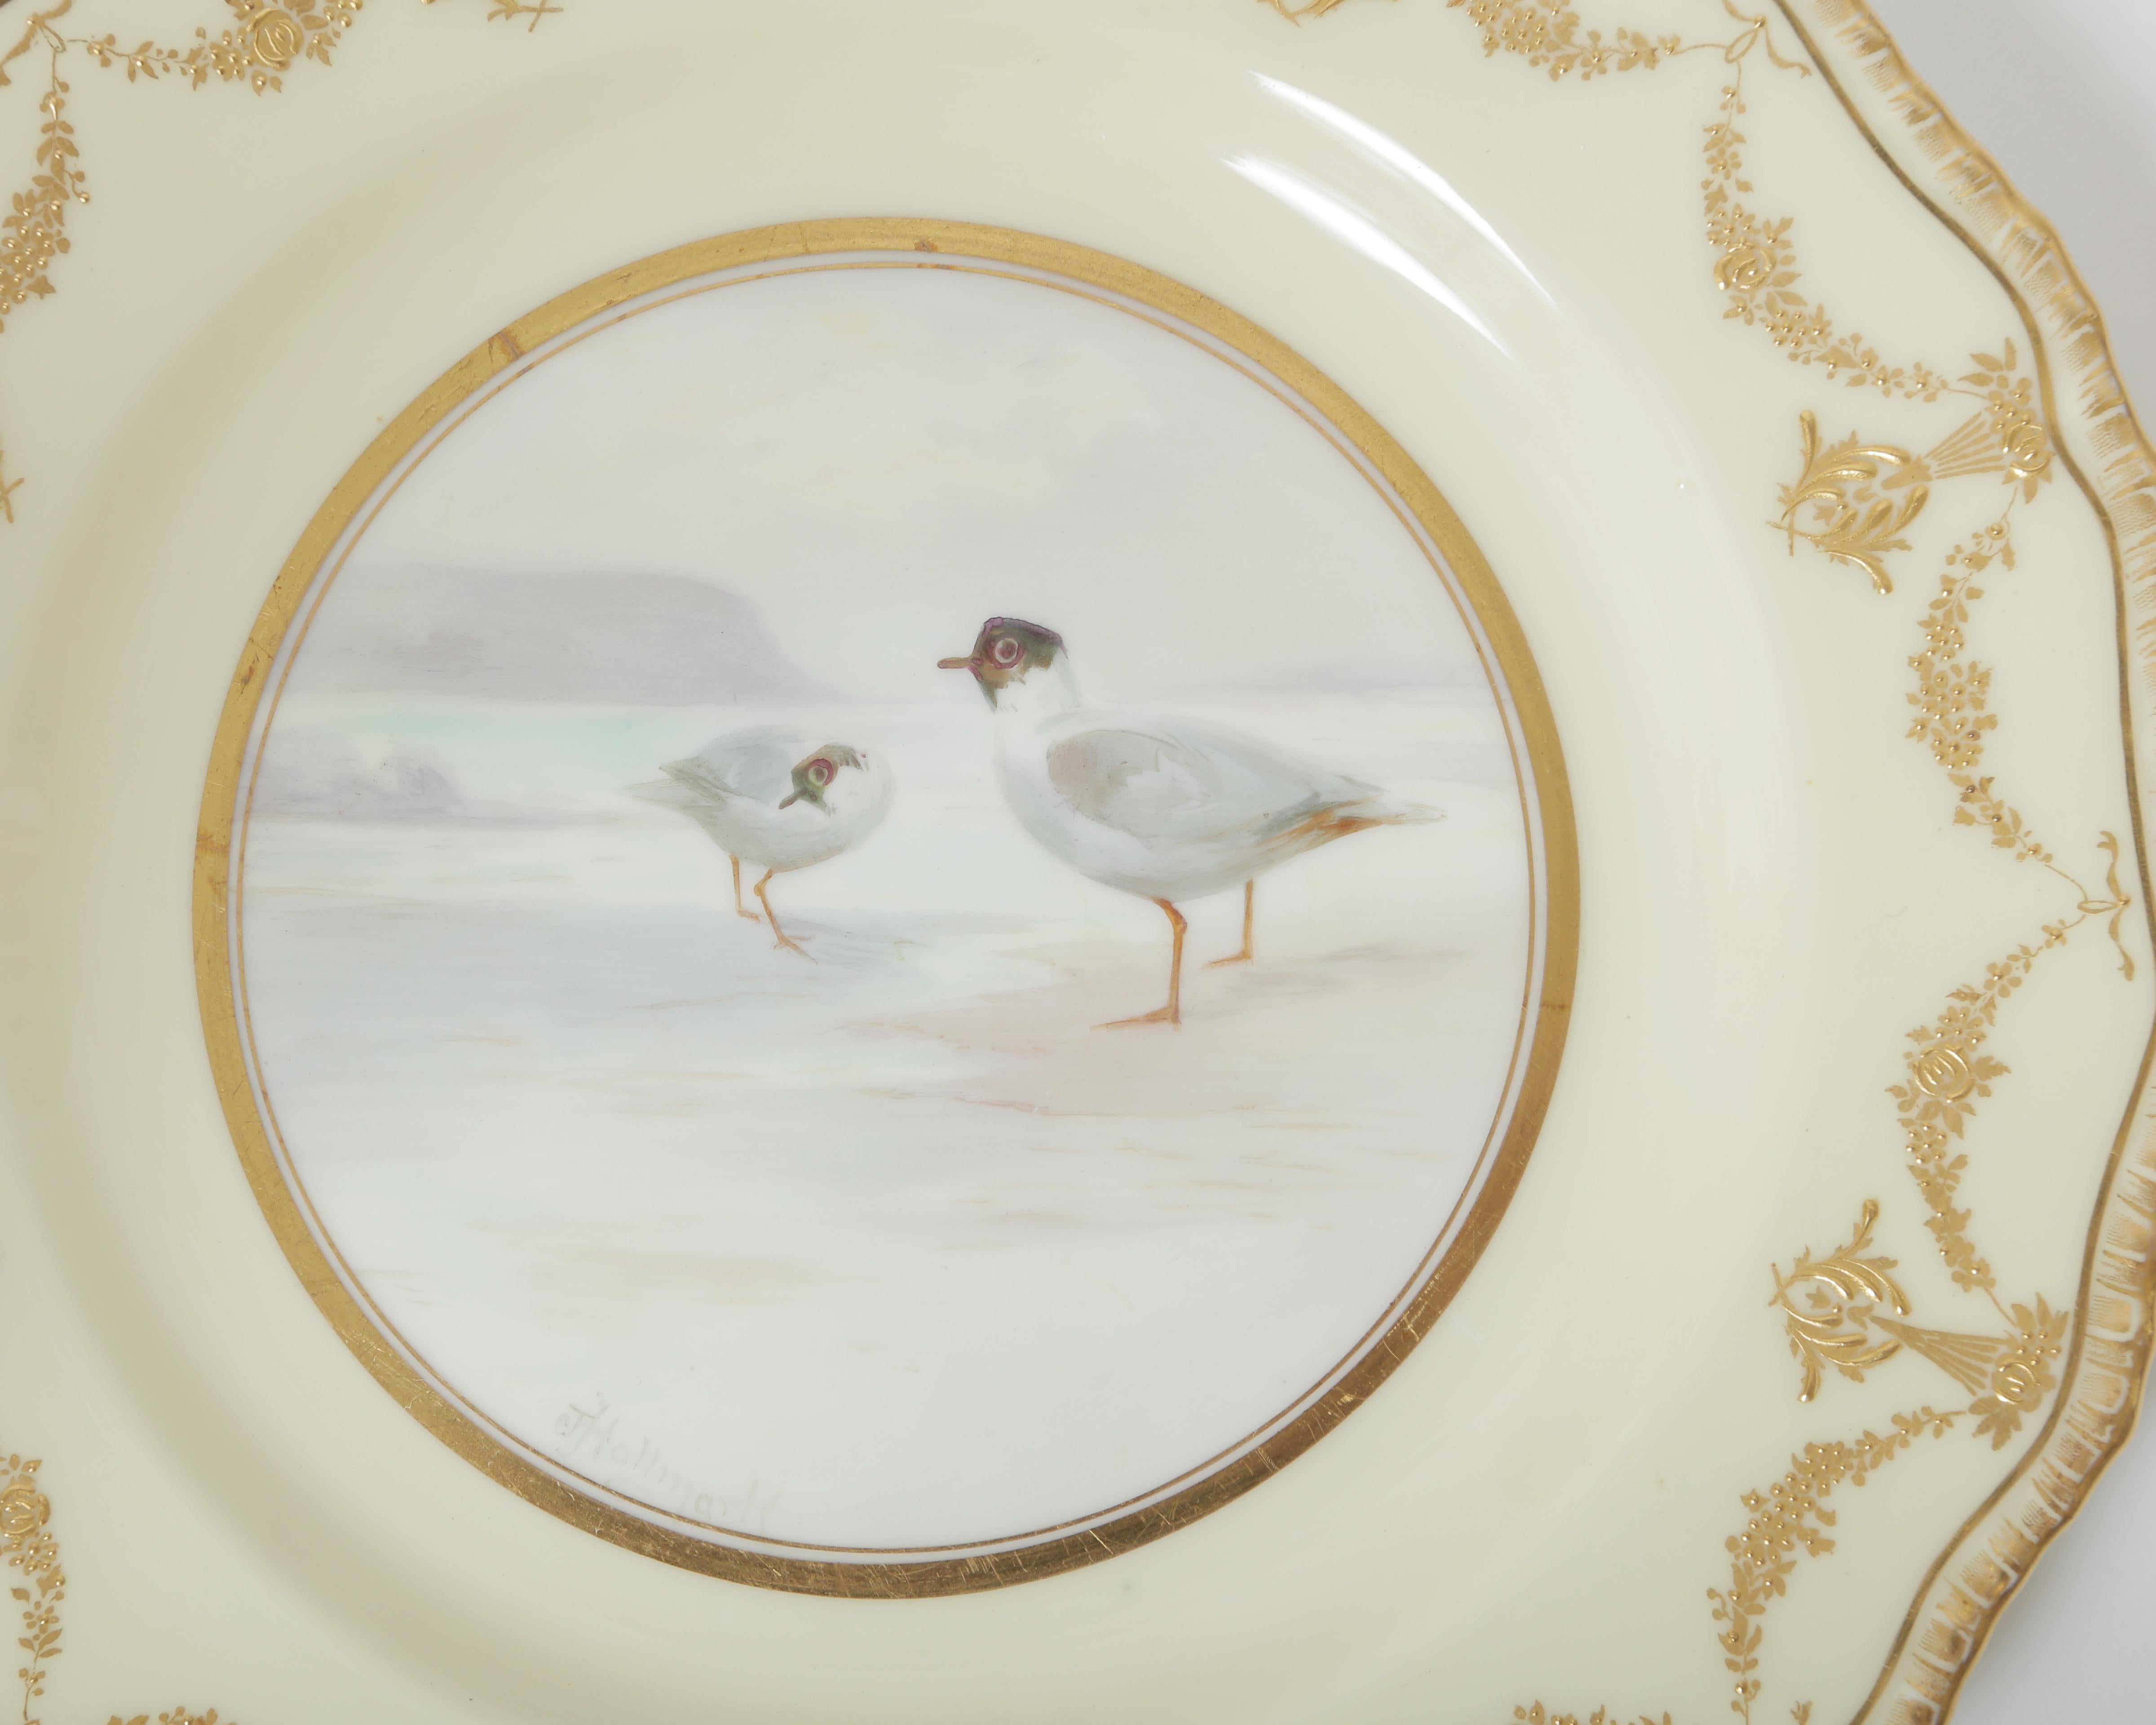 Ten Hand Painted Game Bird Plates, Raised Gold Accents, Antique English 3